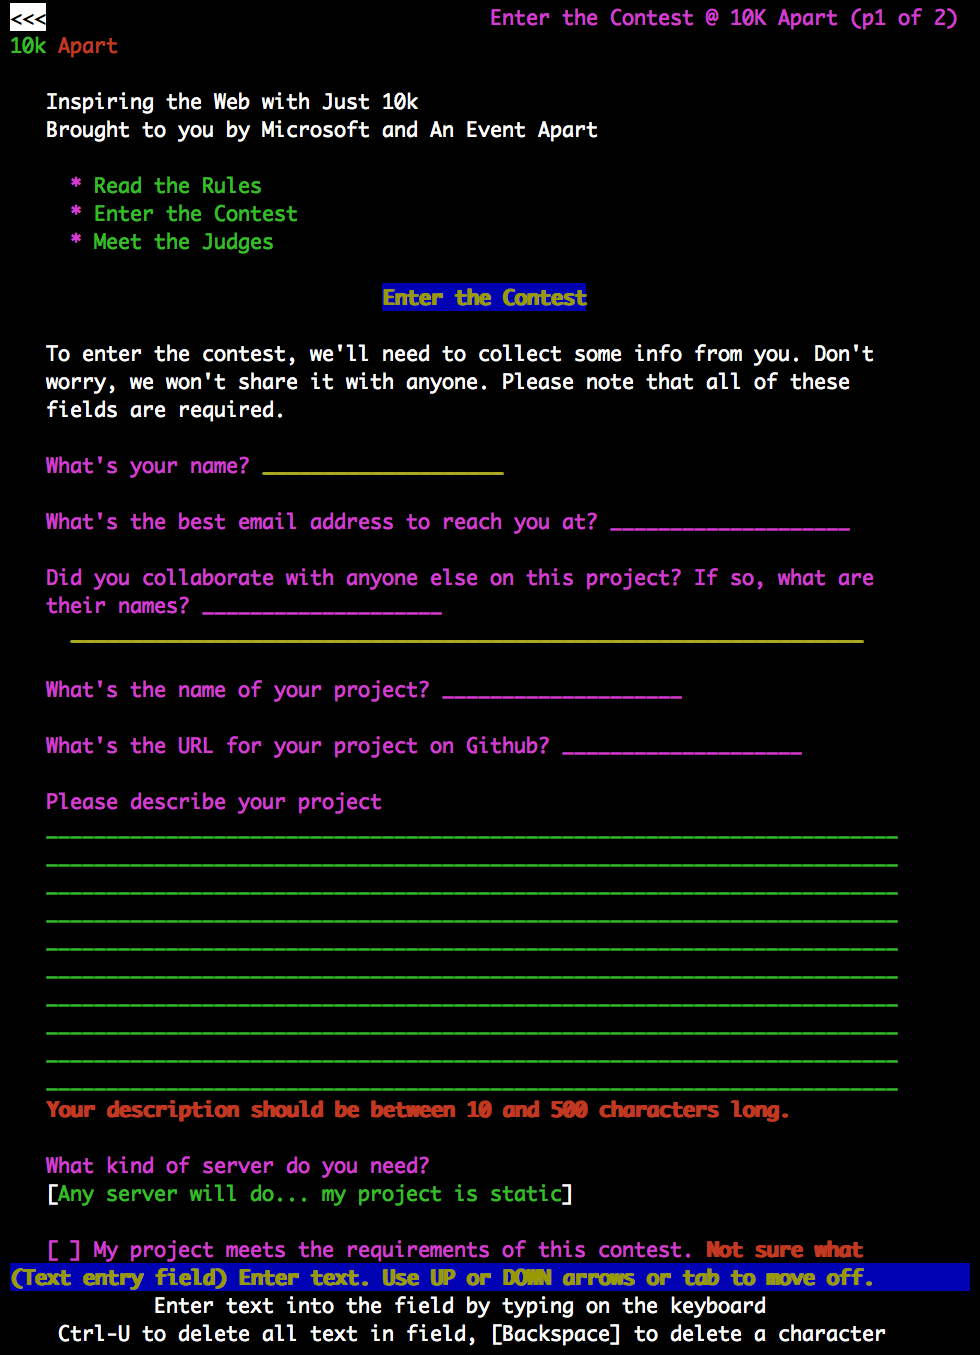 Screen capture showing the 10K Apart contest form in the Lynx web browser